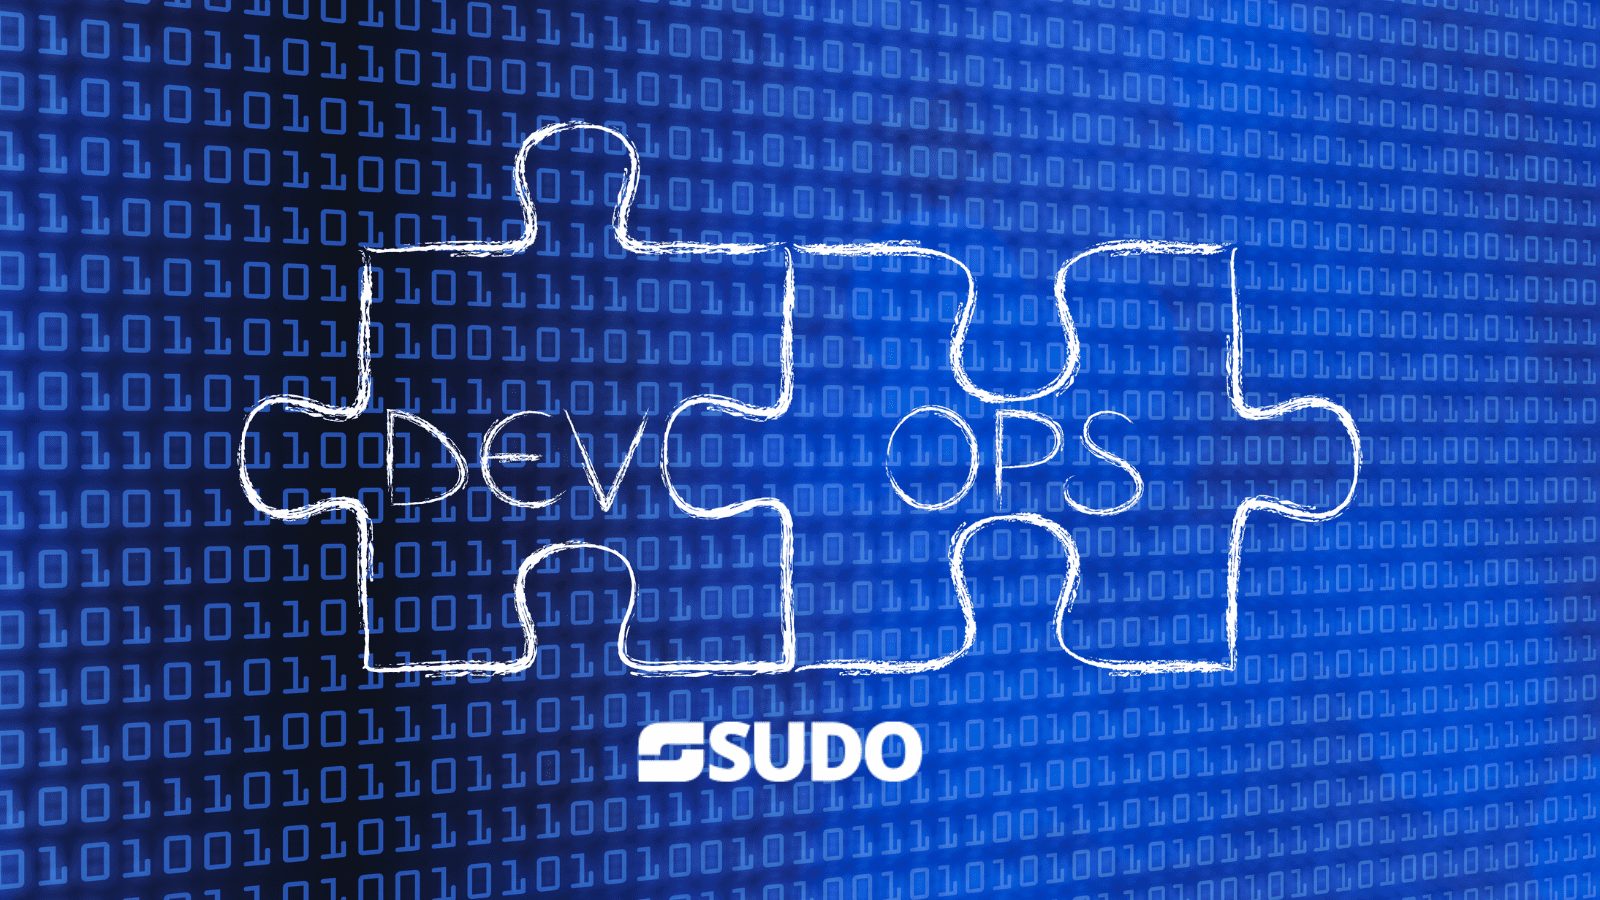 How Can DevOps Consulting Services Drive Continuous Improvement?